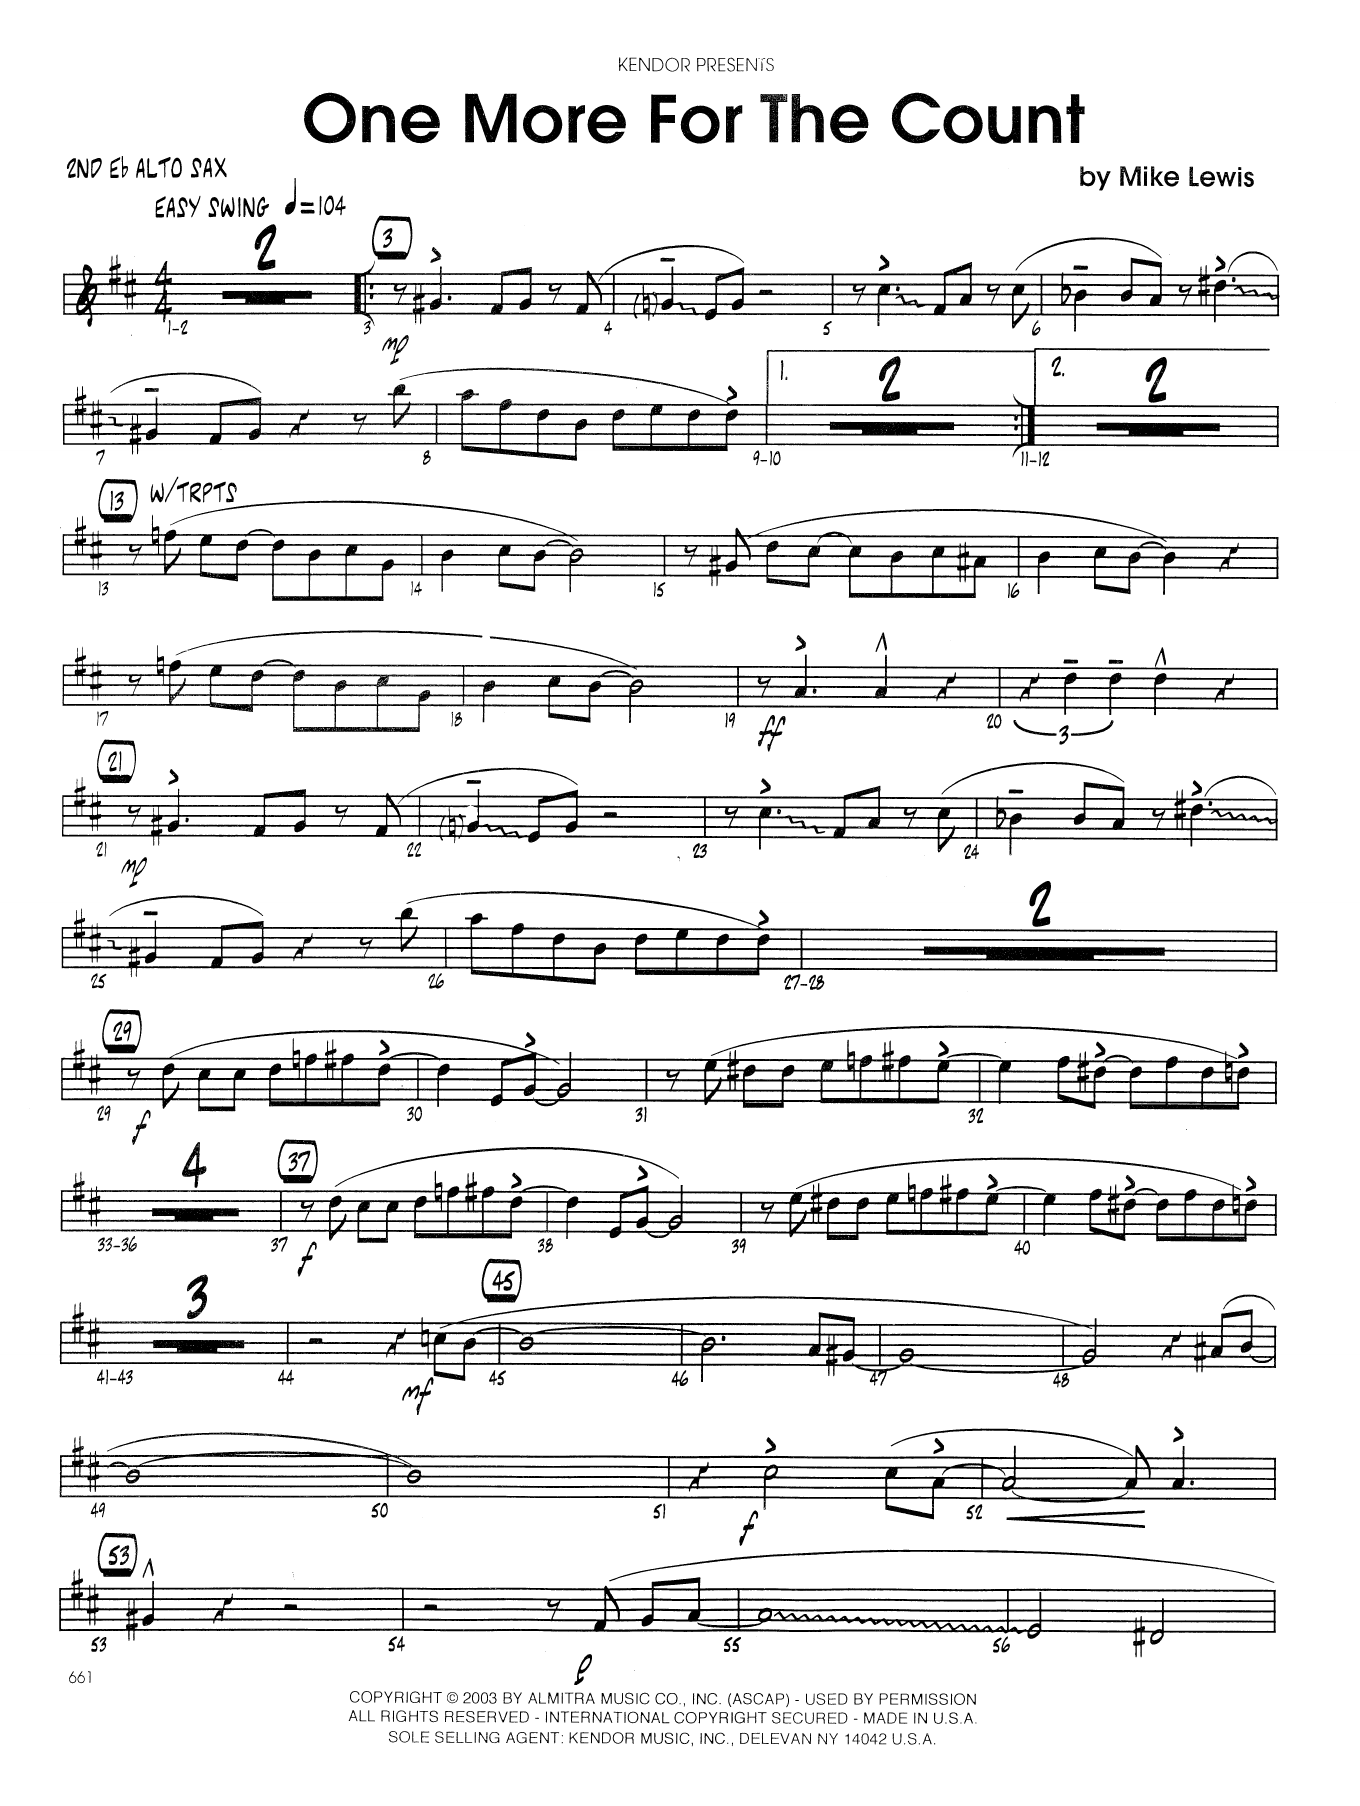 Download Mike Lewis One More For The Count - 2nd Eb Alto Sa Sheet Music